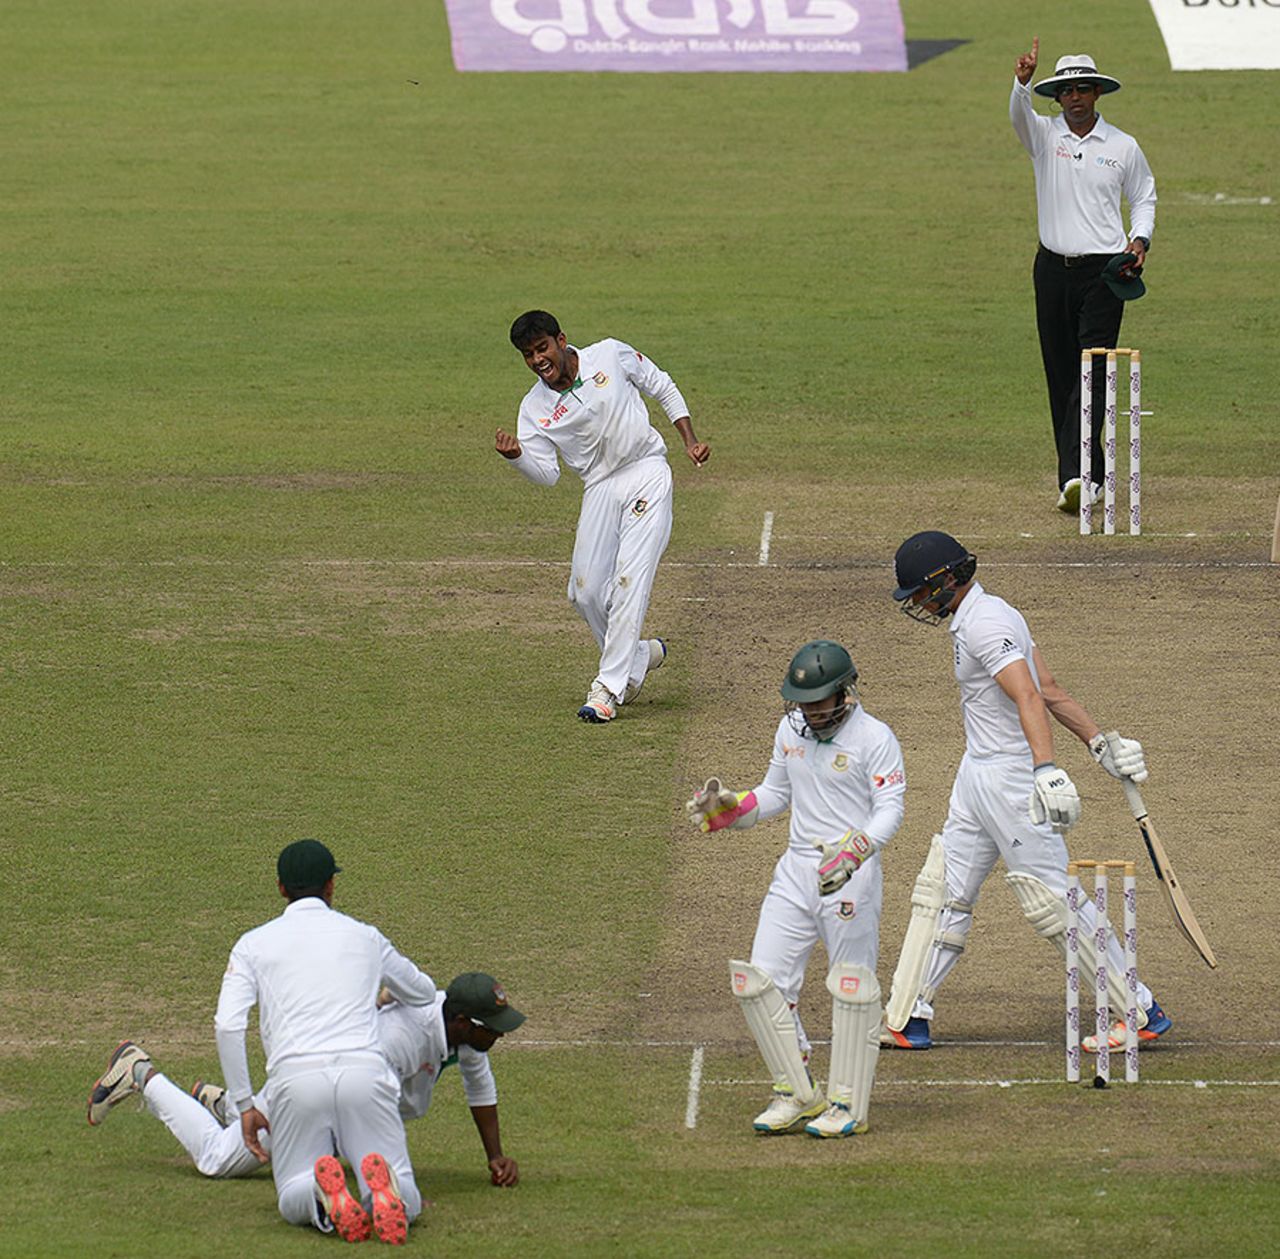 Zafar Ansari edged to gully to give Mehedi Hasan another wicket, Bangladesh v England, 2nd Test, Mirpur, 2nd day, October 29, 2016